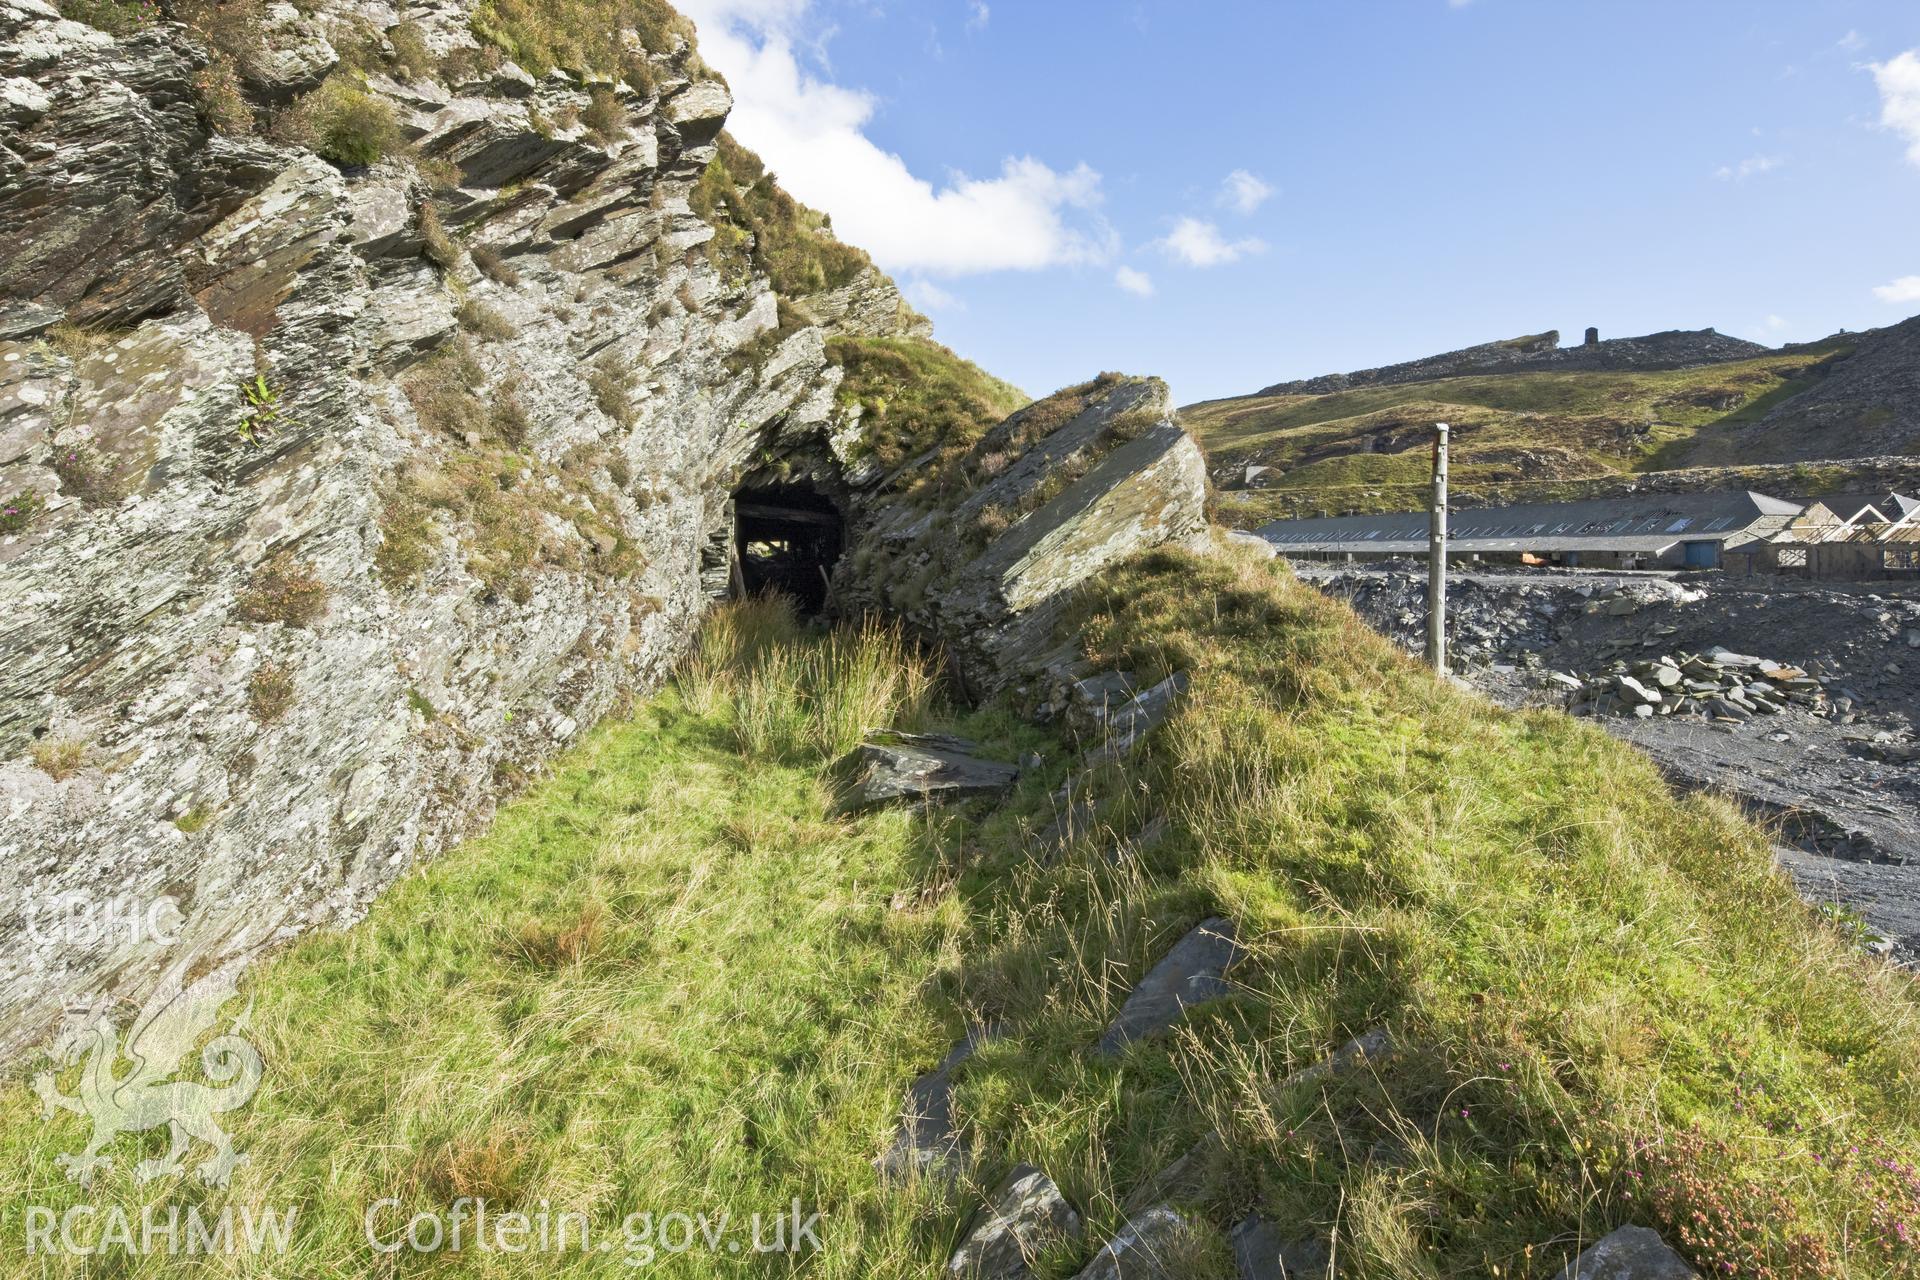 Long Tip Tramway tunnel from the west.